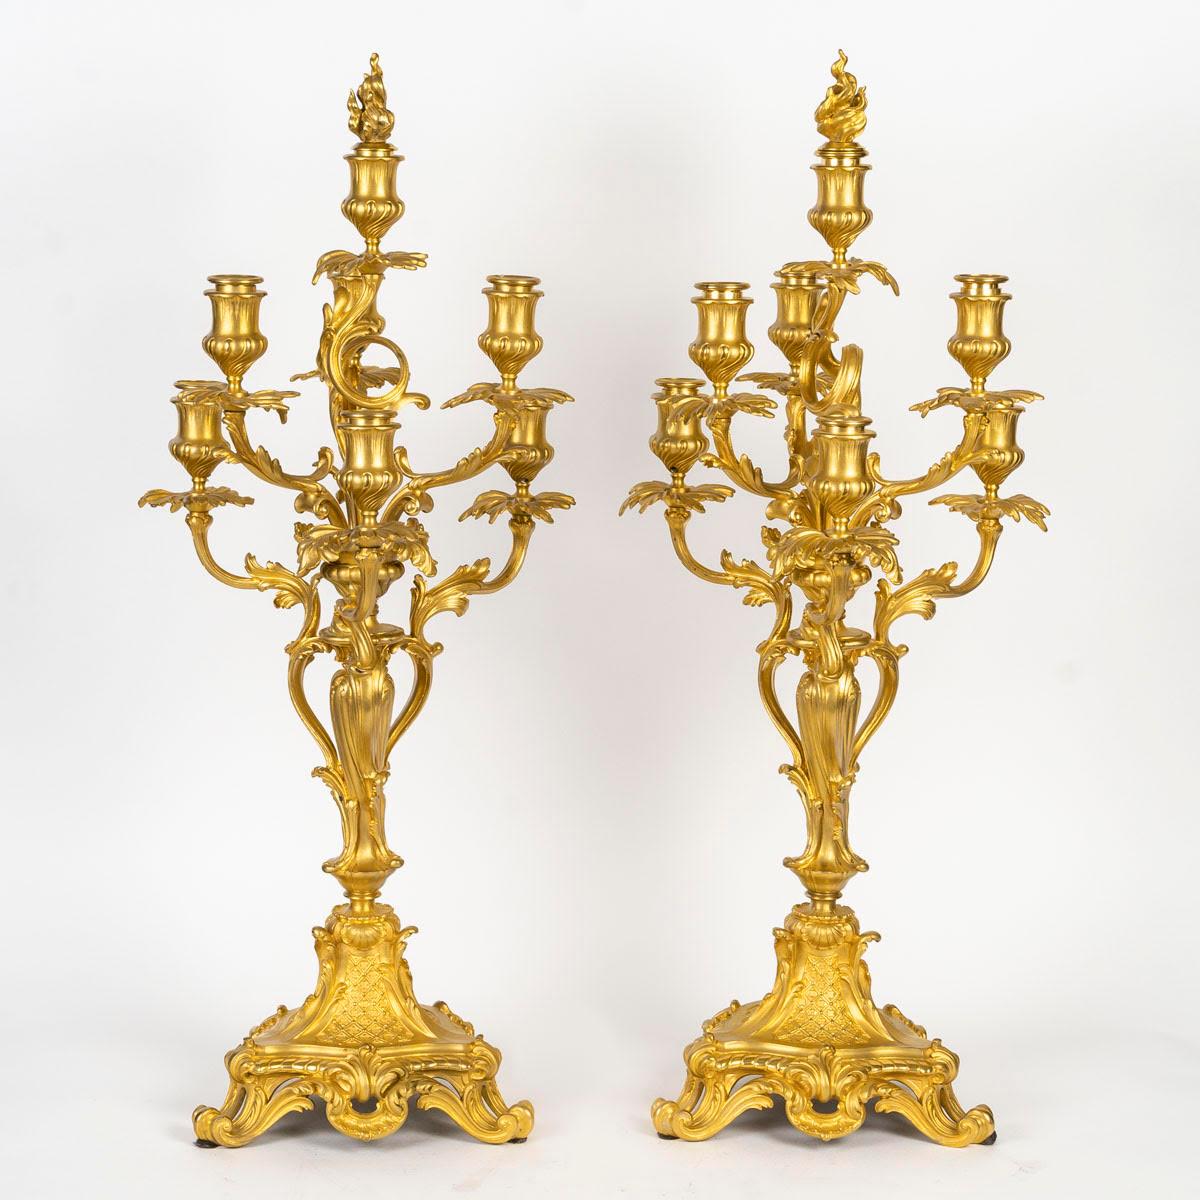 An important pair of Louis XV style gilt bronze candelabra, signed Barbedienne, 19th century.

A pair of Louis XV style 7-branch candelabra in chased and gilt bronze, signed Ferdinand Barbedienne, 19th century, Napoleon III period.
H: 75cm, W: 30cm,